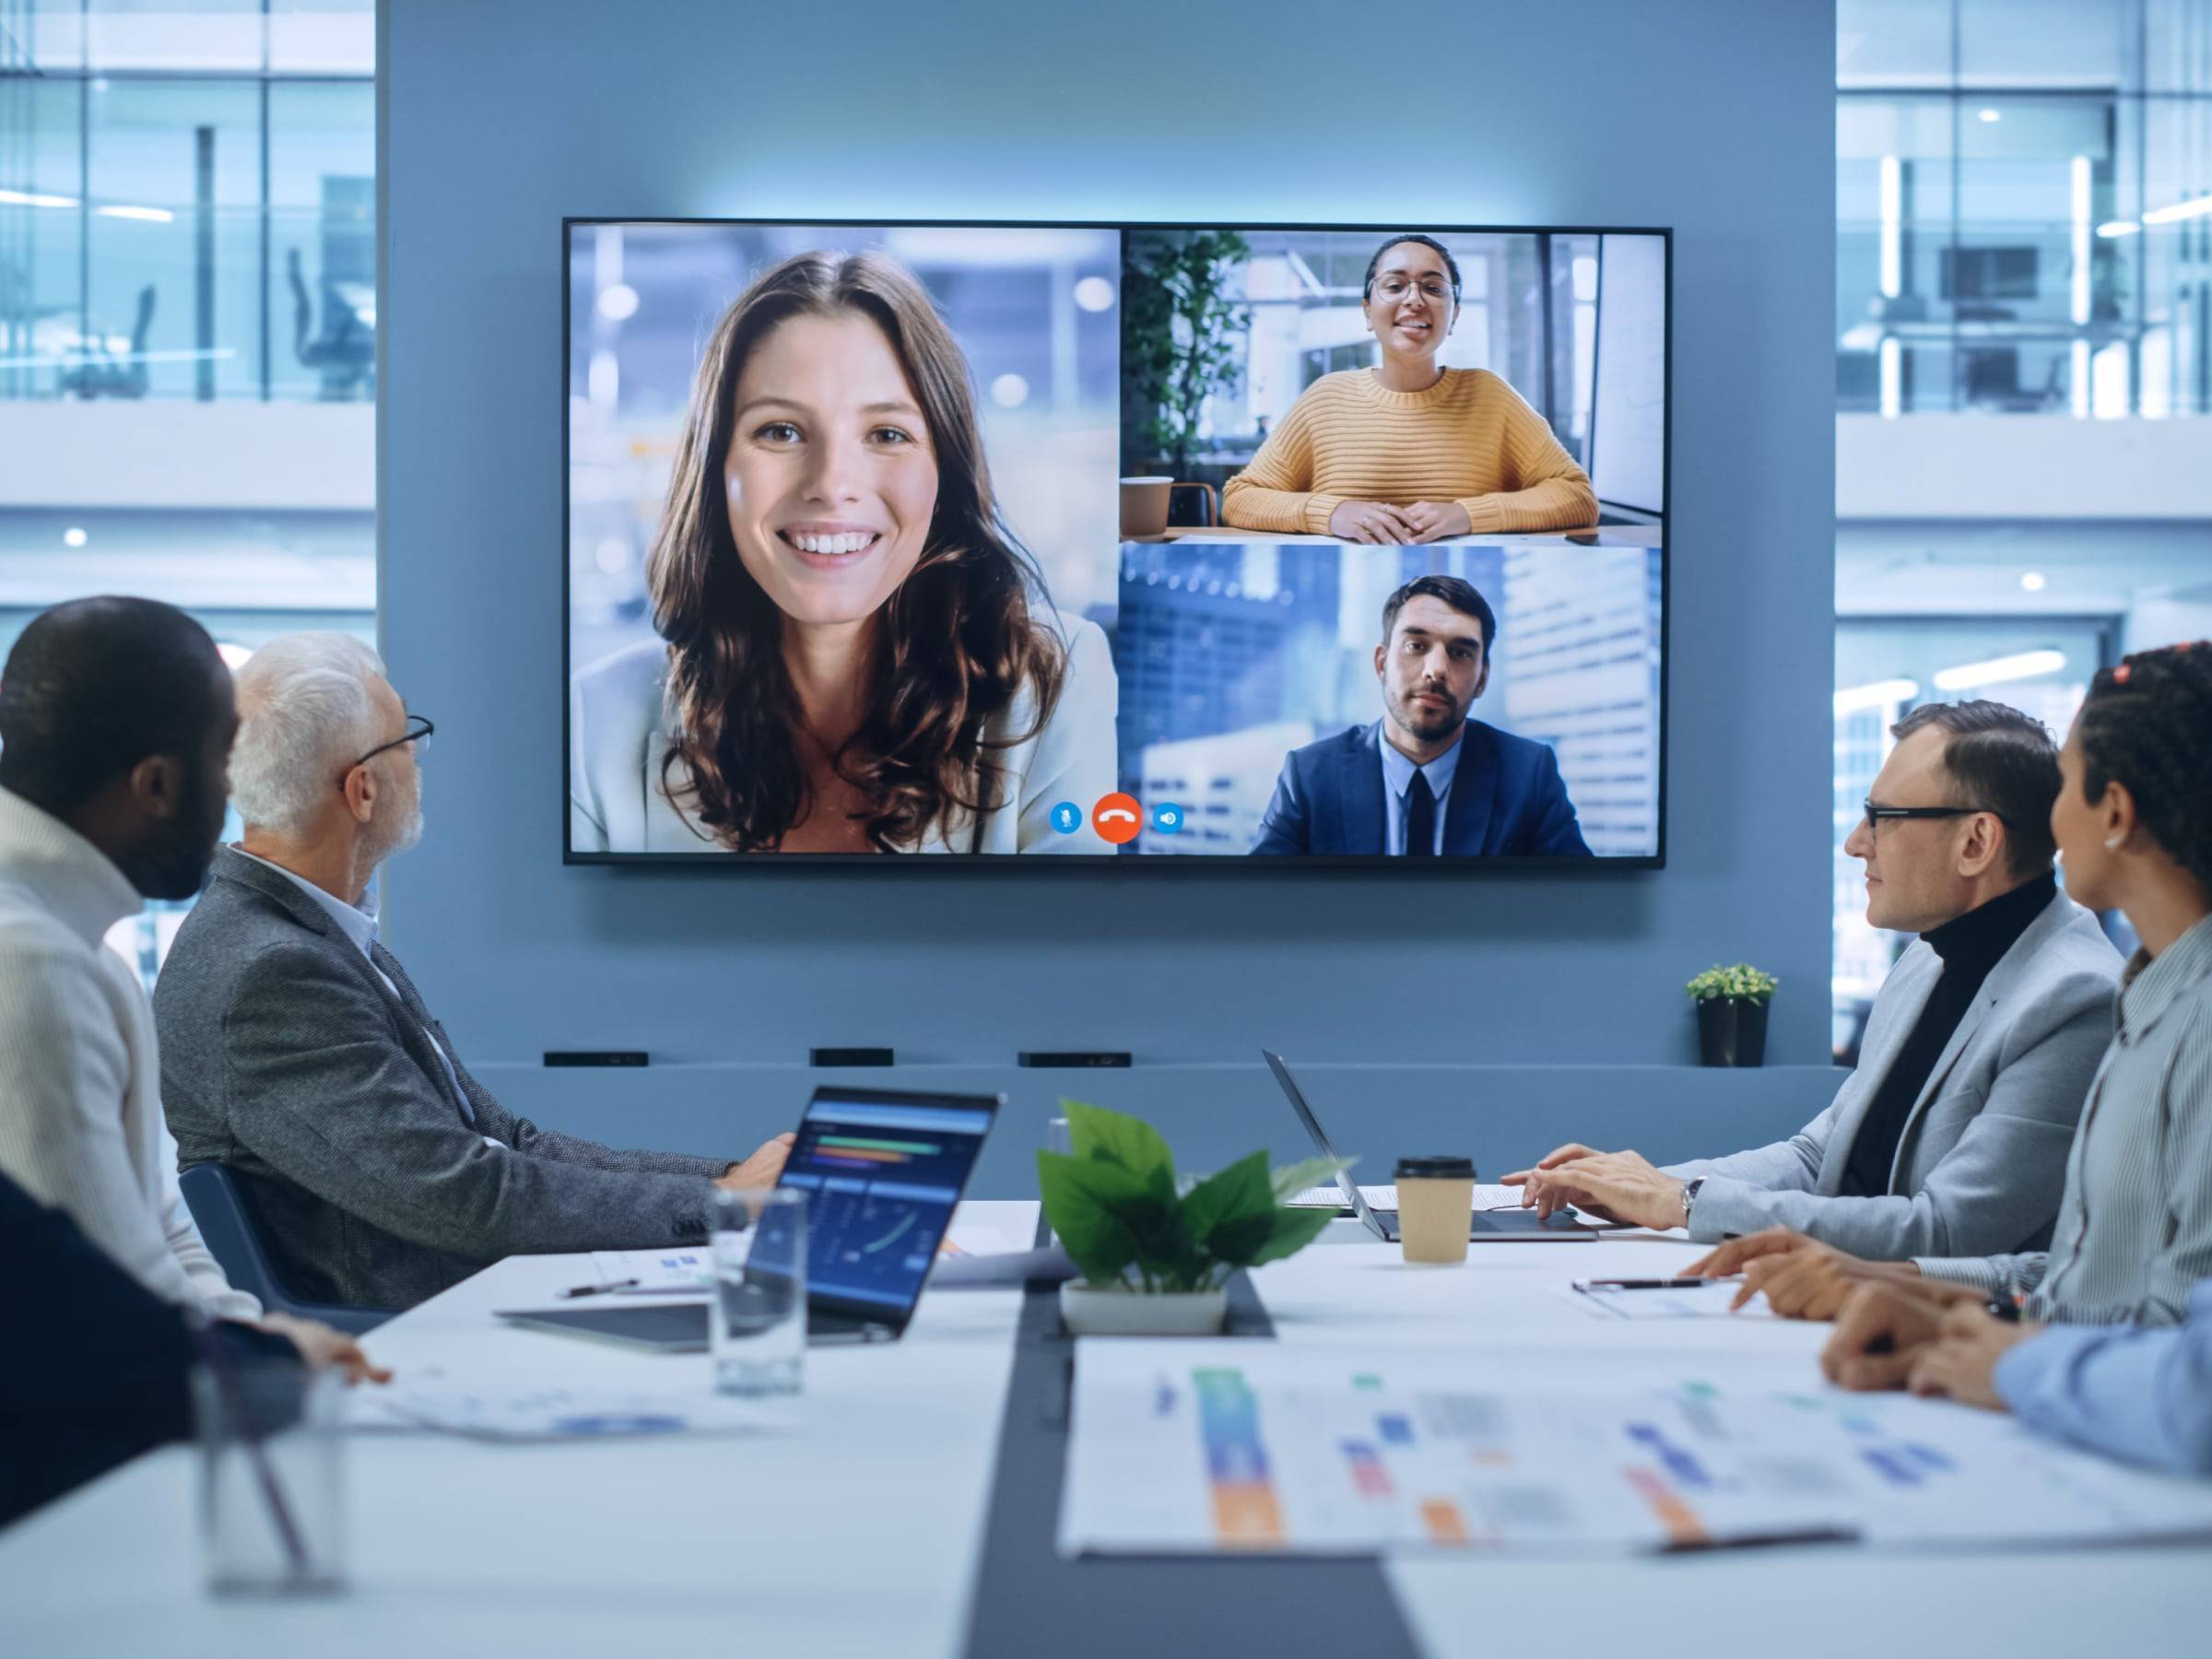 People having a hybrid meeting on a boardroom along with a digital led screen where some members are physically present and others joined virtually.